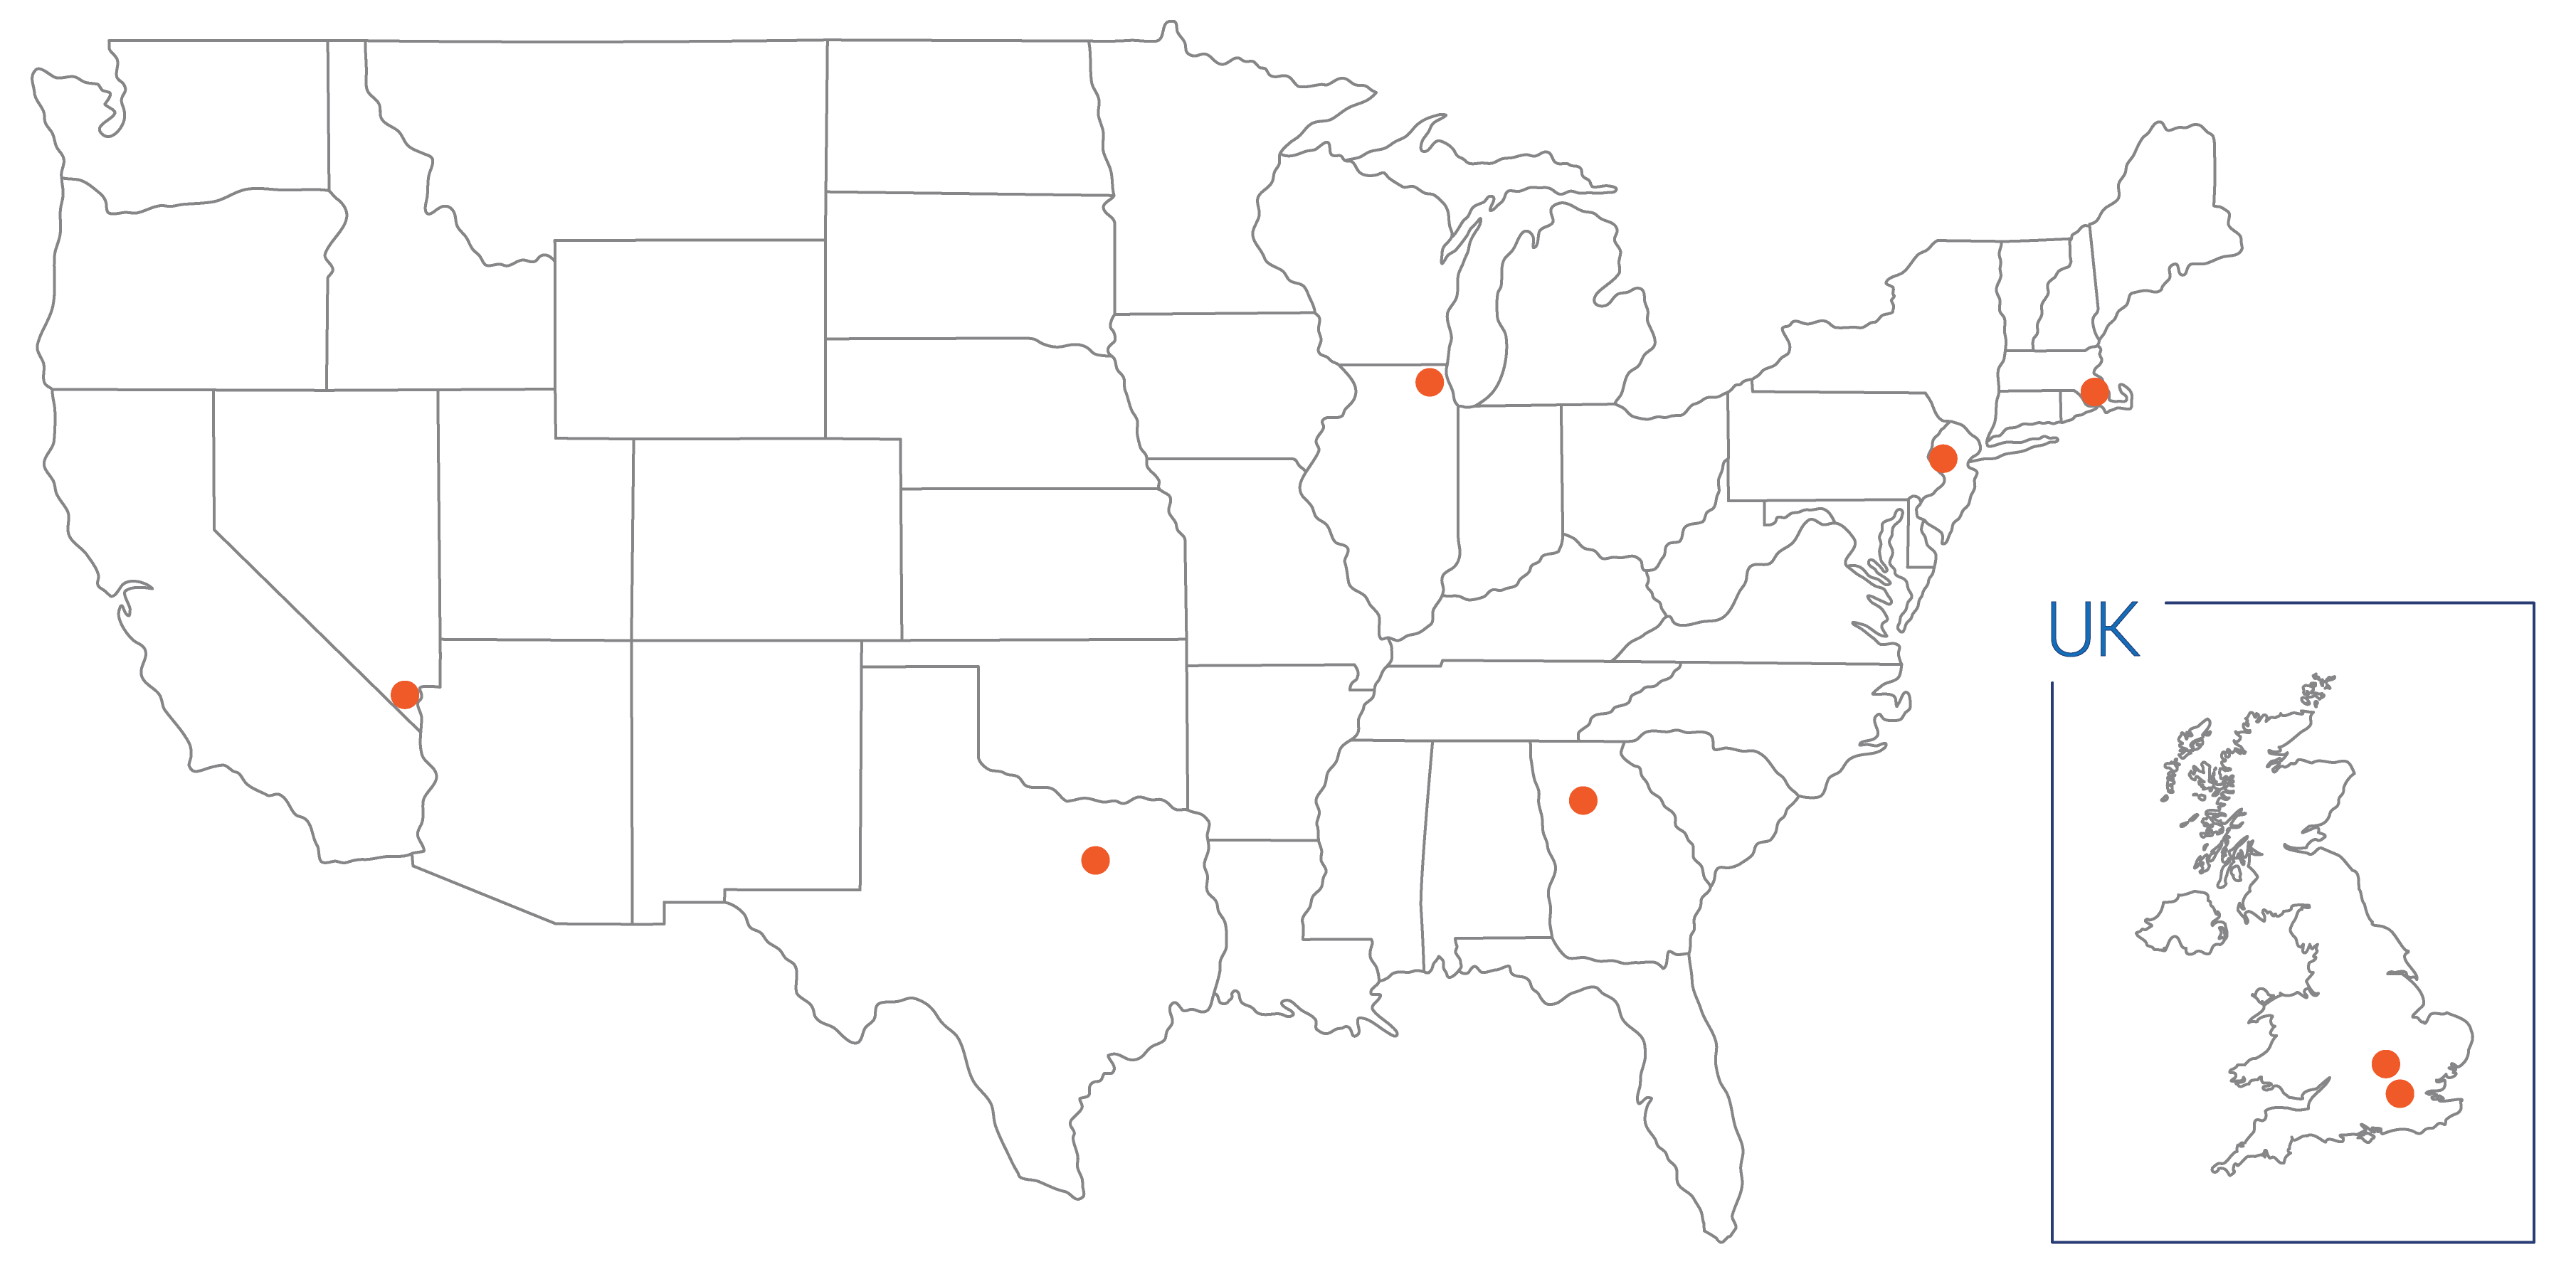 Thrive data centers locations map